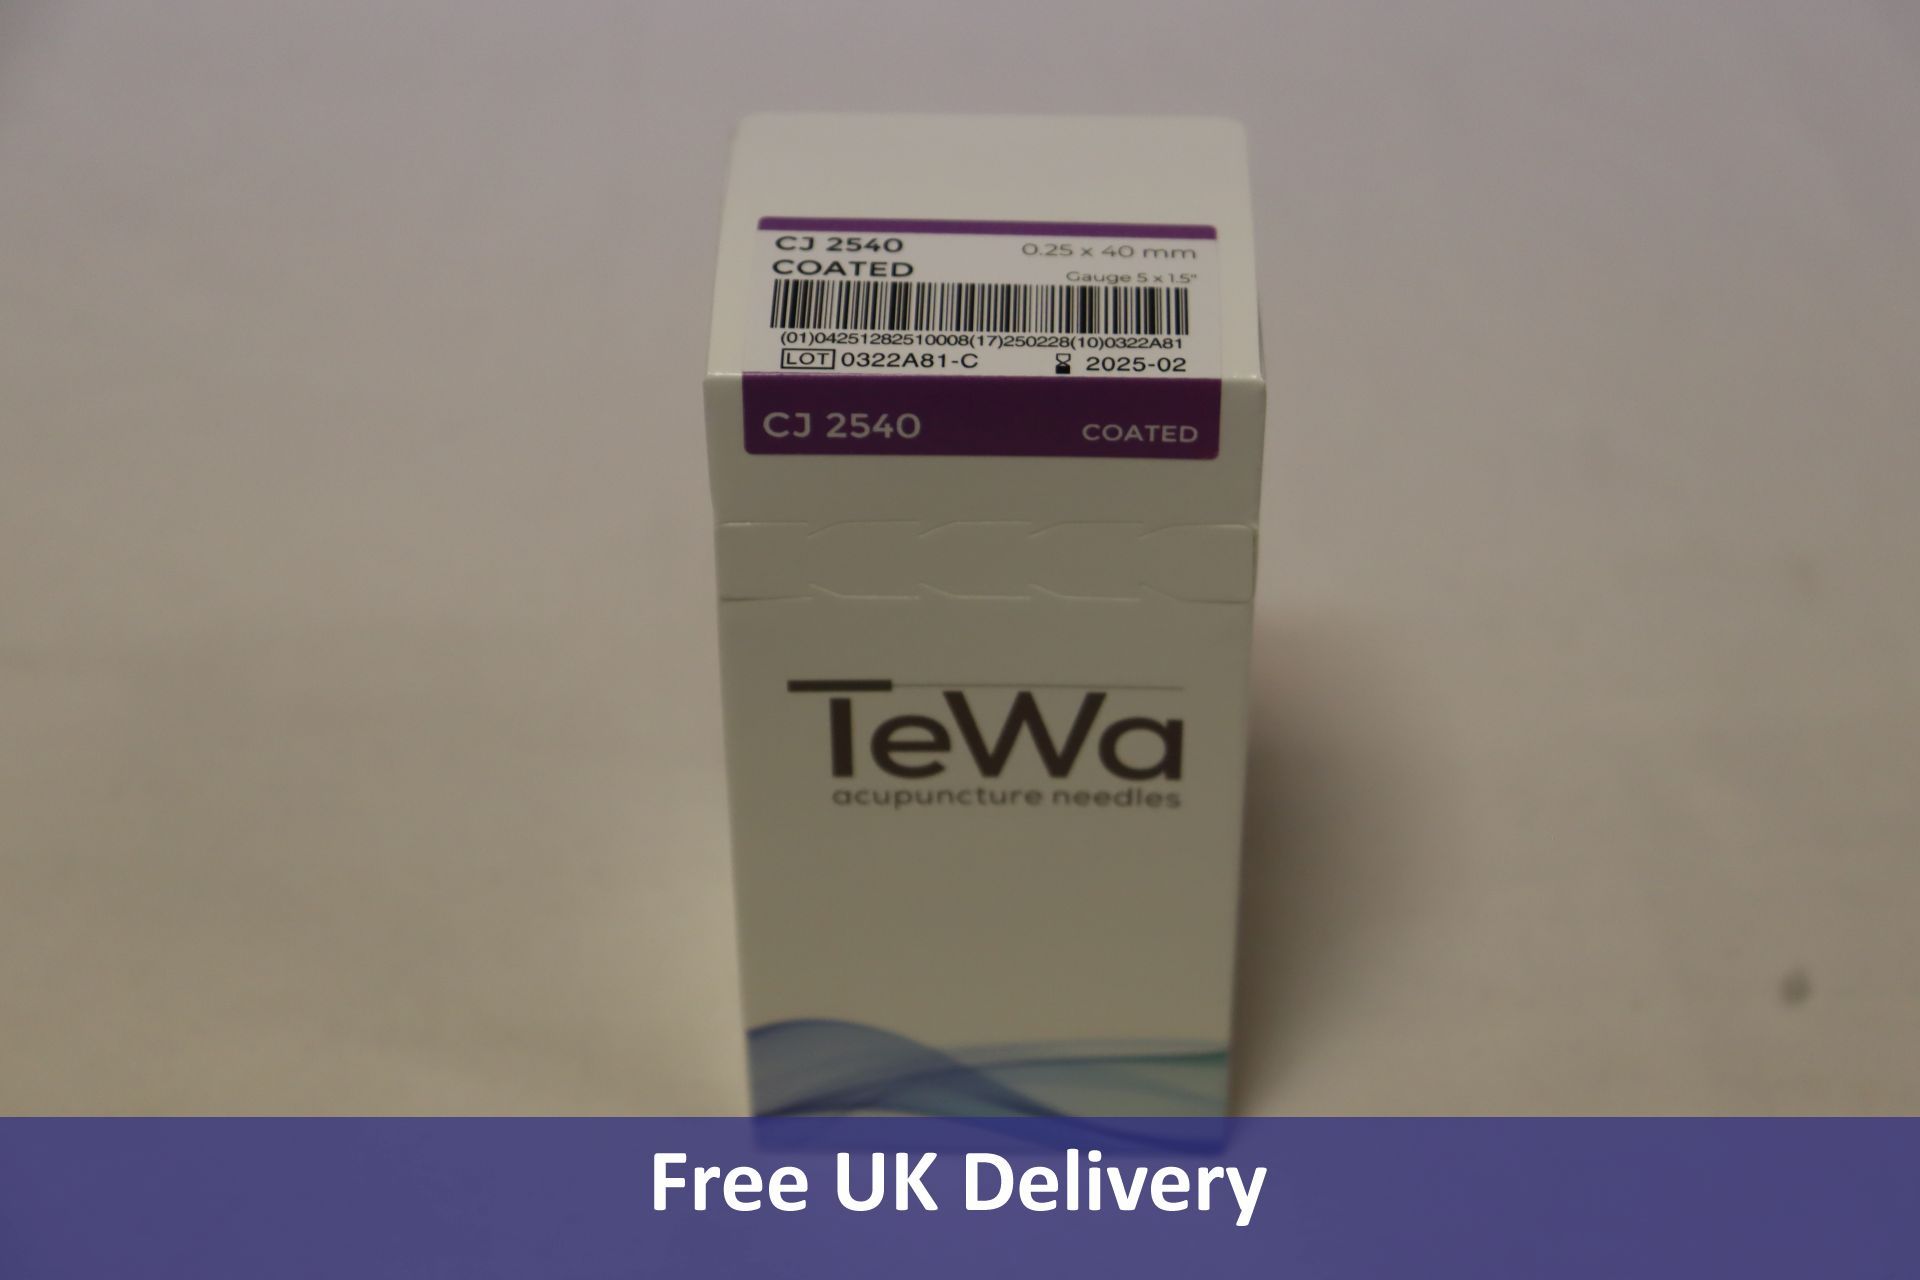 Ten-thousand Tewa Acupuncture Needles, 0.20 x 40mm, in 100 packs of 100 - Image 7 of 10